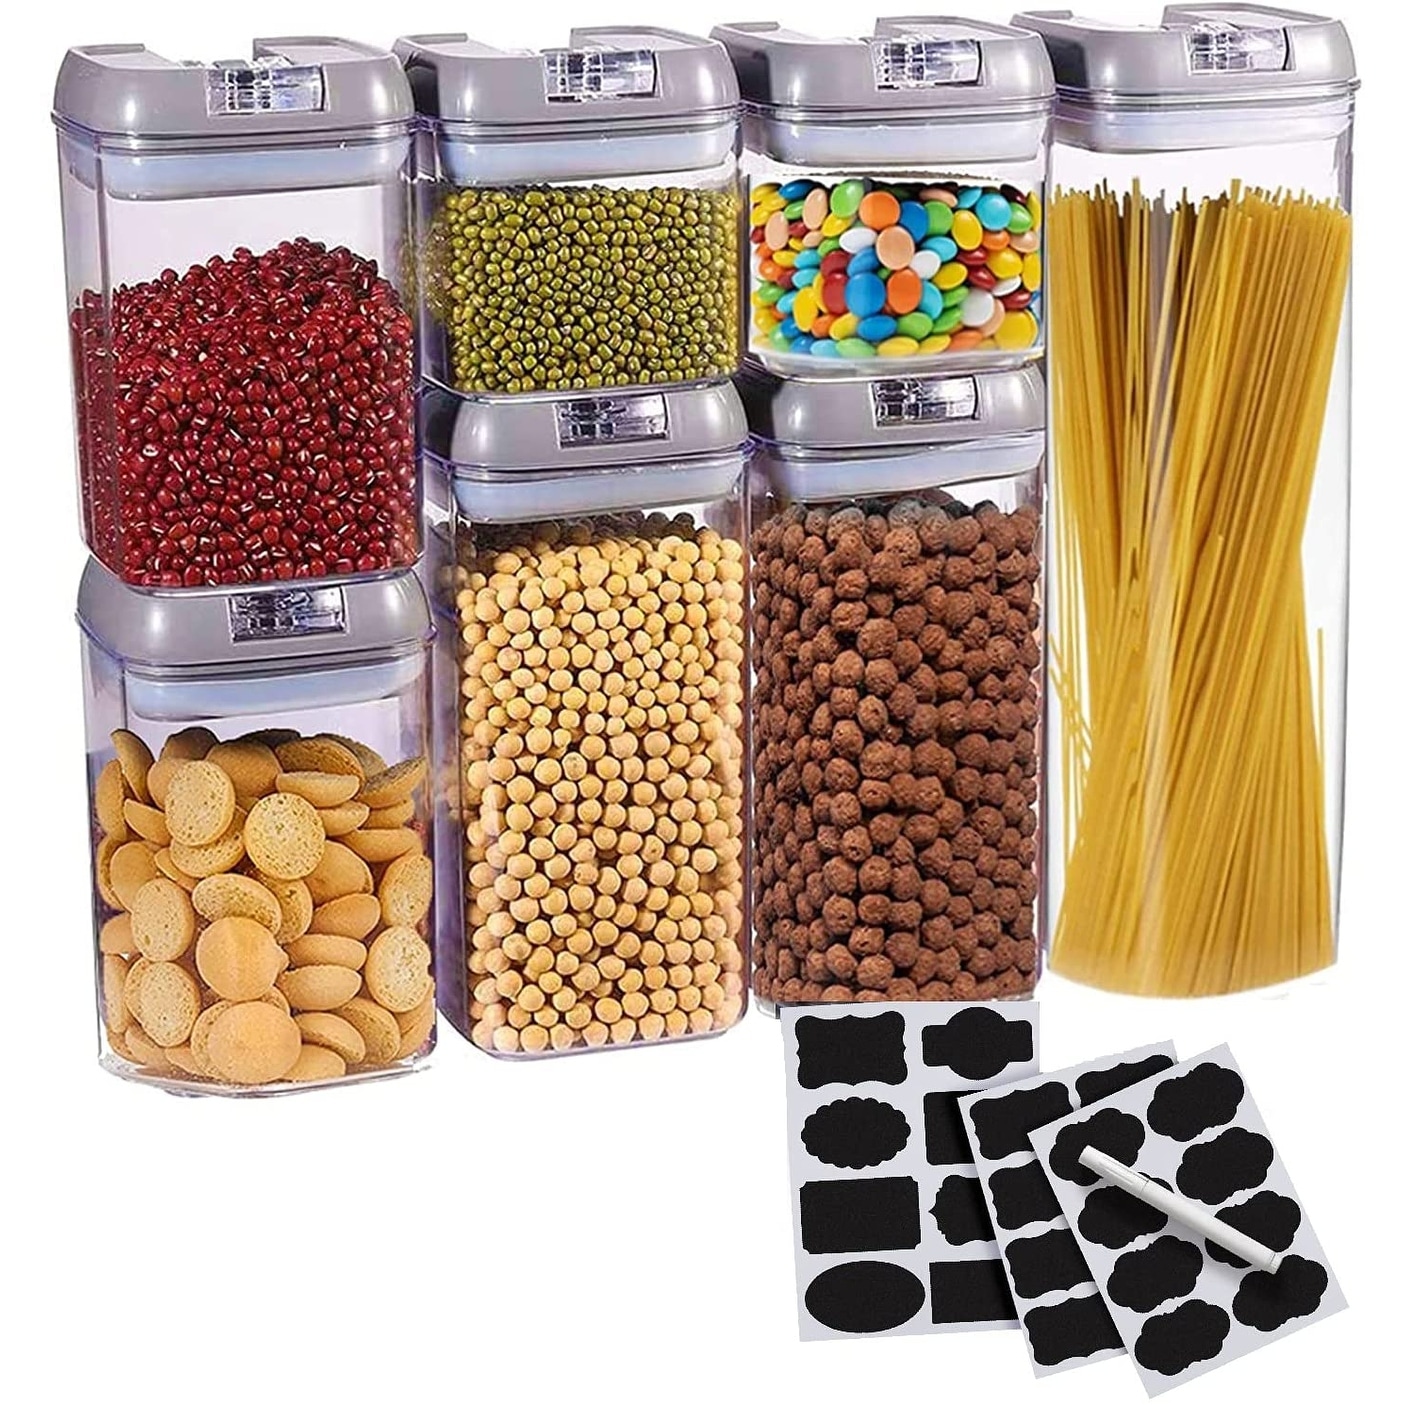 https://ak1.ostkcdn.com/images/products/is/images/direct/fb231415e940c9640612488b6dd103330446b94f/Cheer-Collection-Set-of-7-Airtight-Food-Storage-Containers.jpg